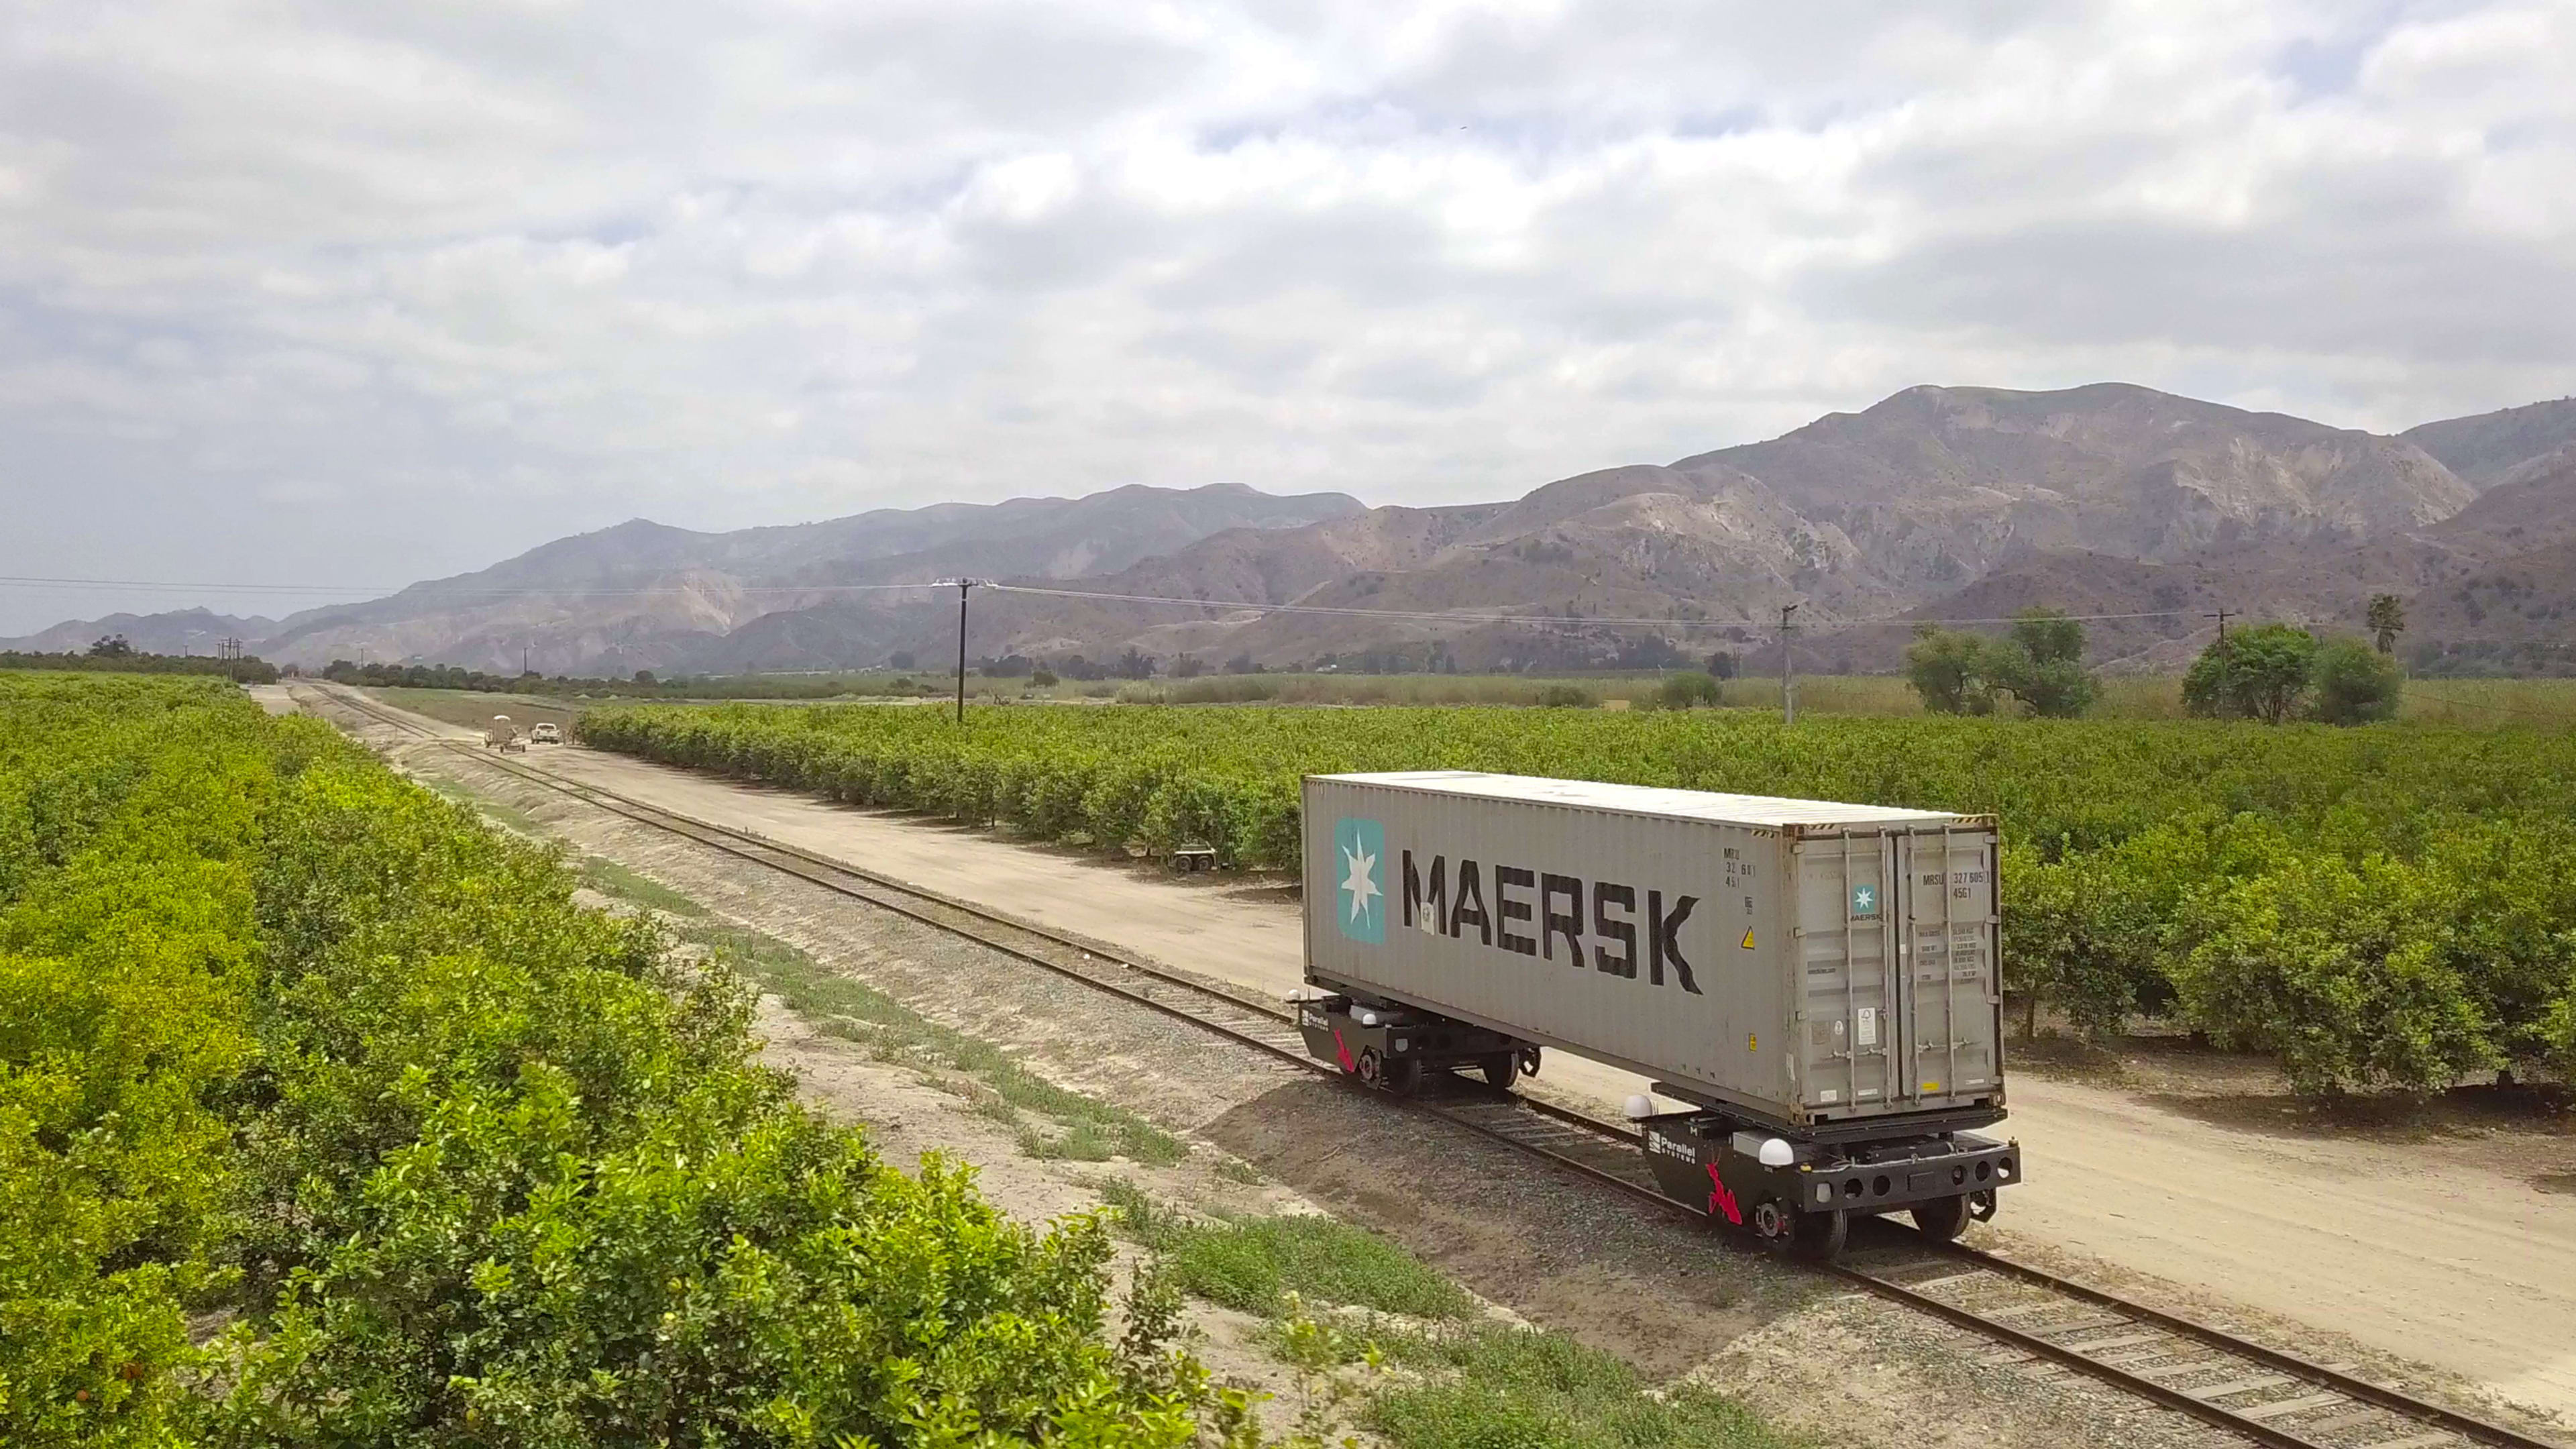 Former SpaceX engineers raised $50 million to build a Tesla for freight trains